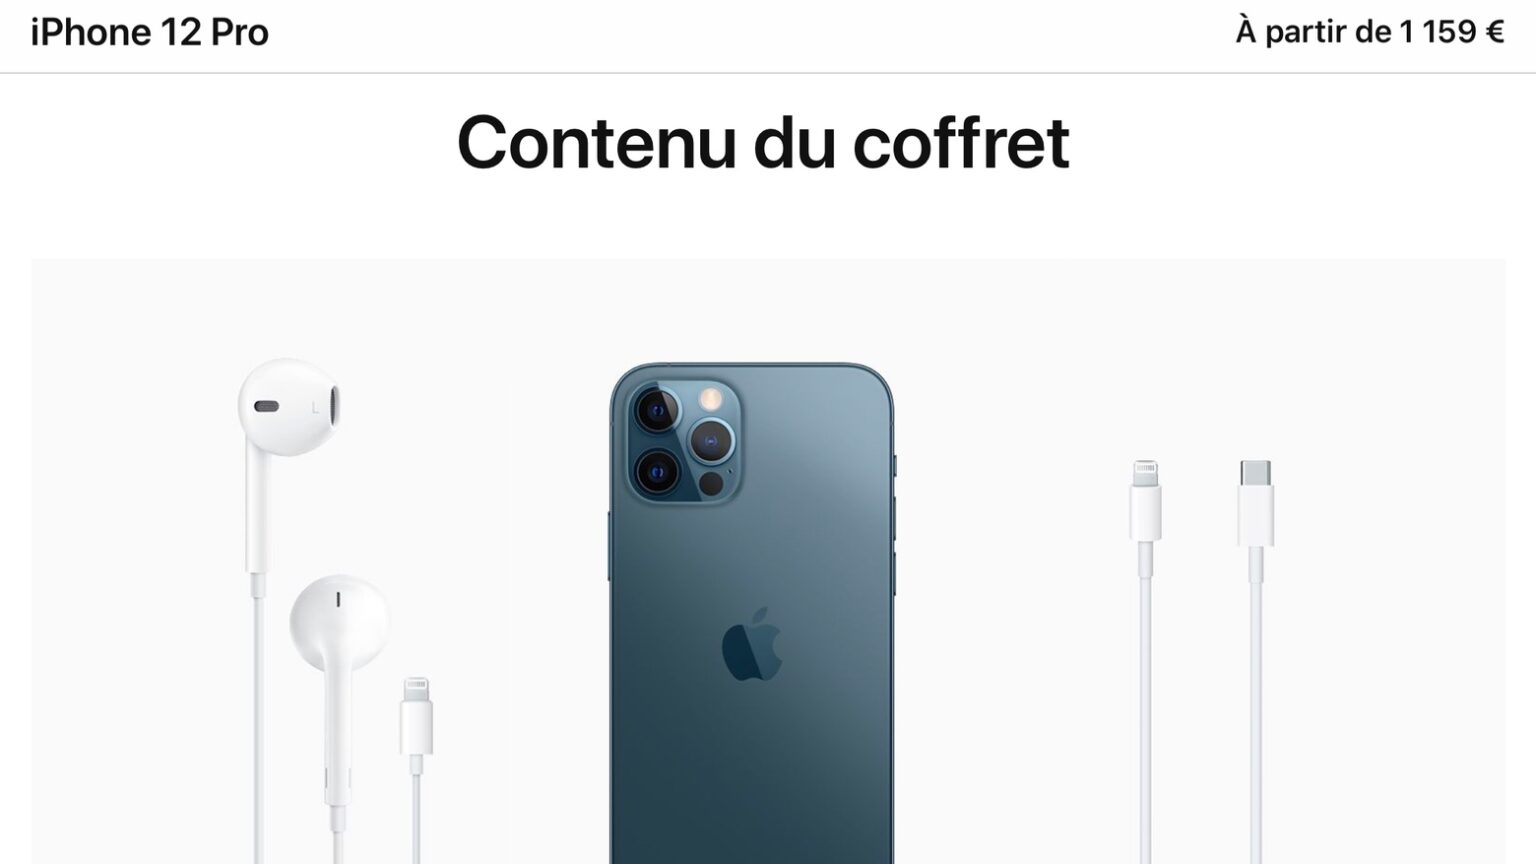 Free iPhone headphones are still a thing in France.